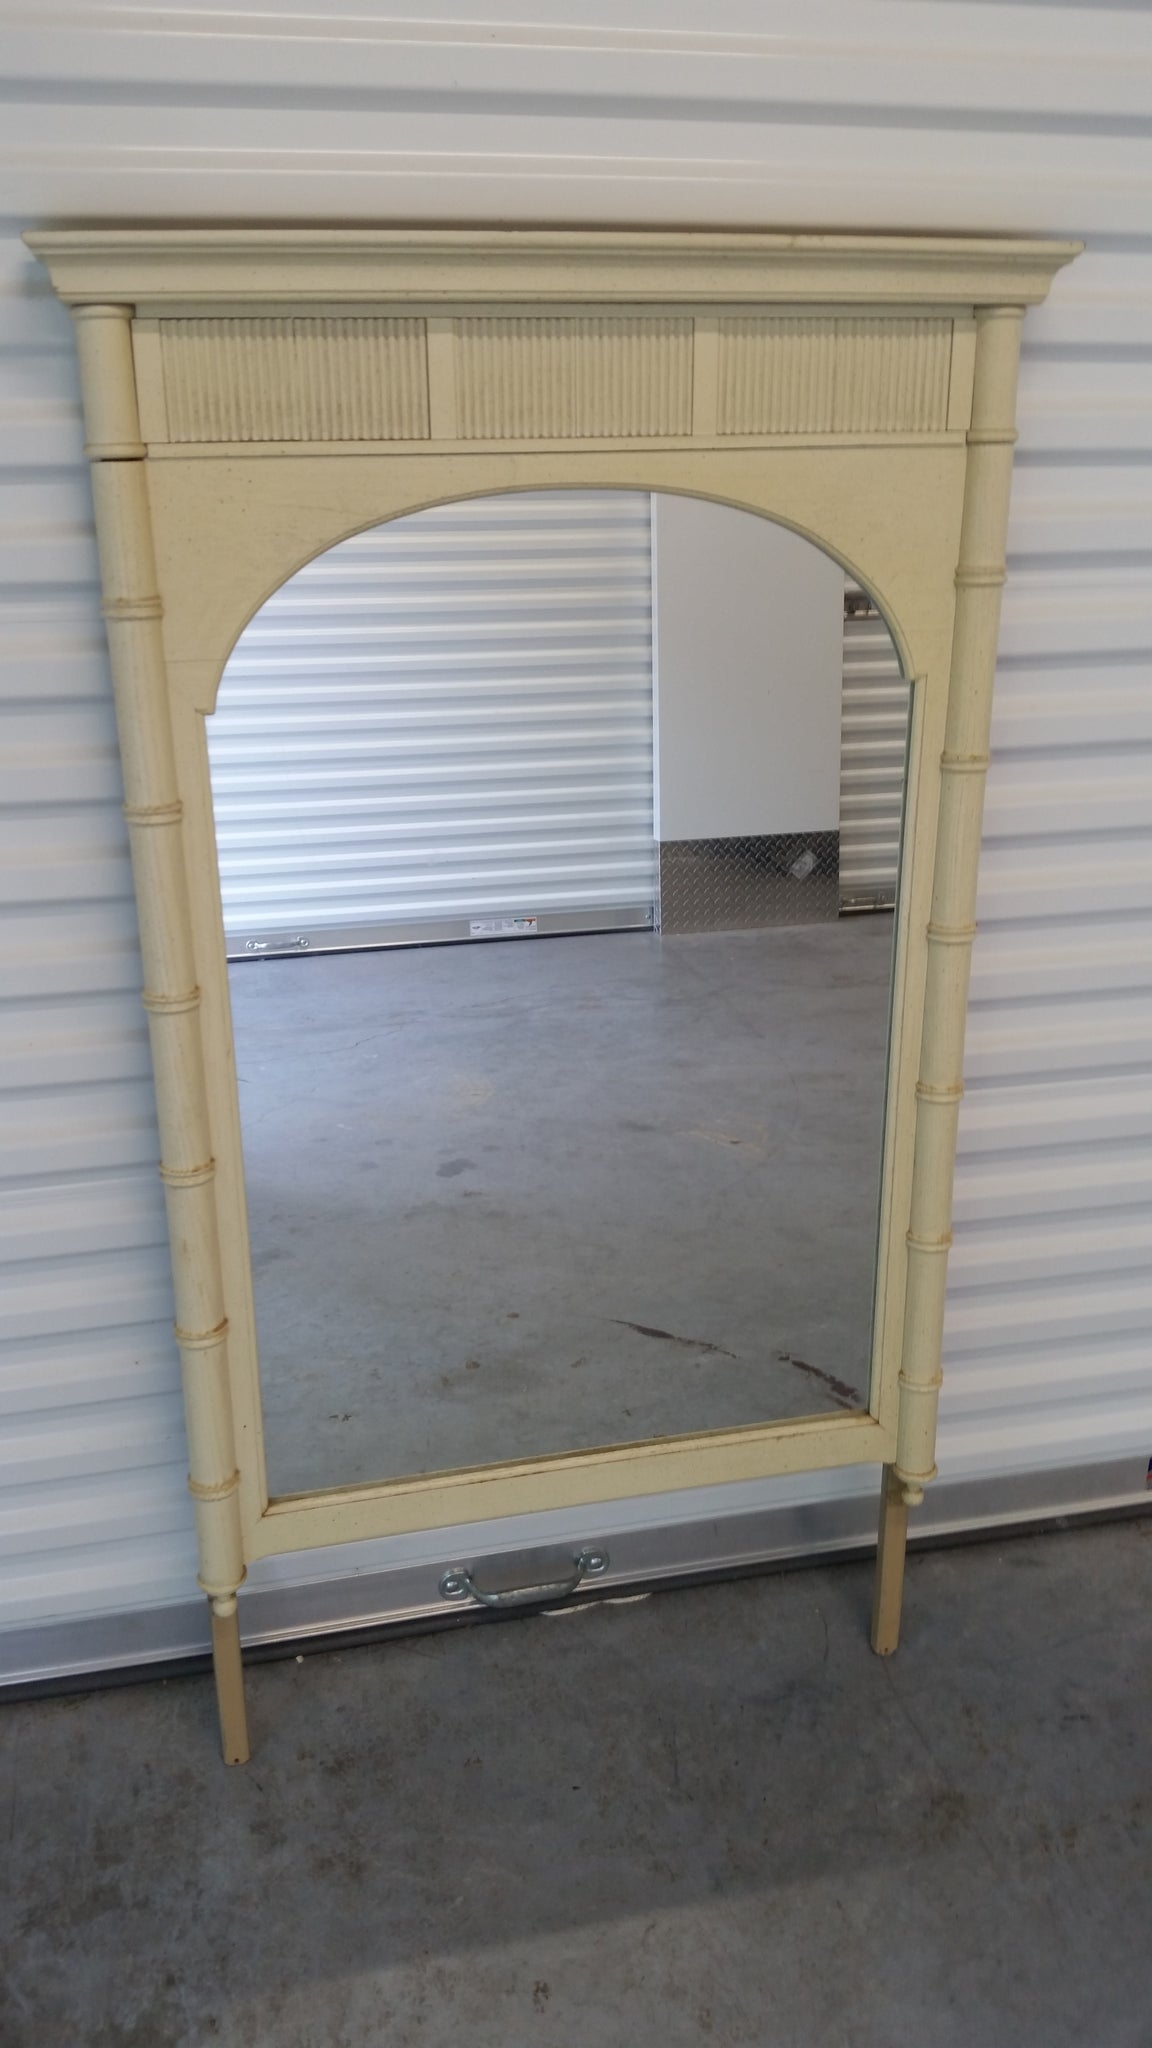 VINTAGE FAUX BAMBOO MIRROR